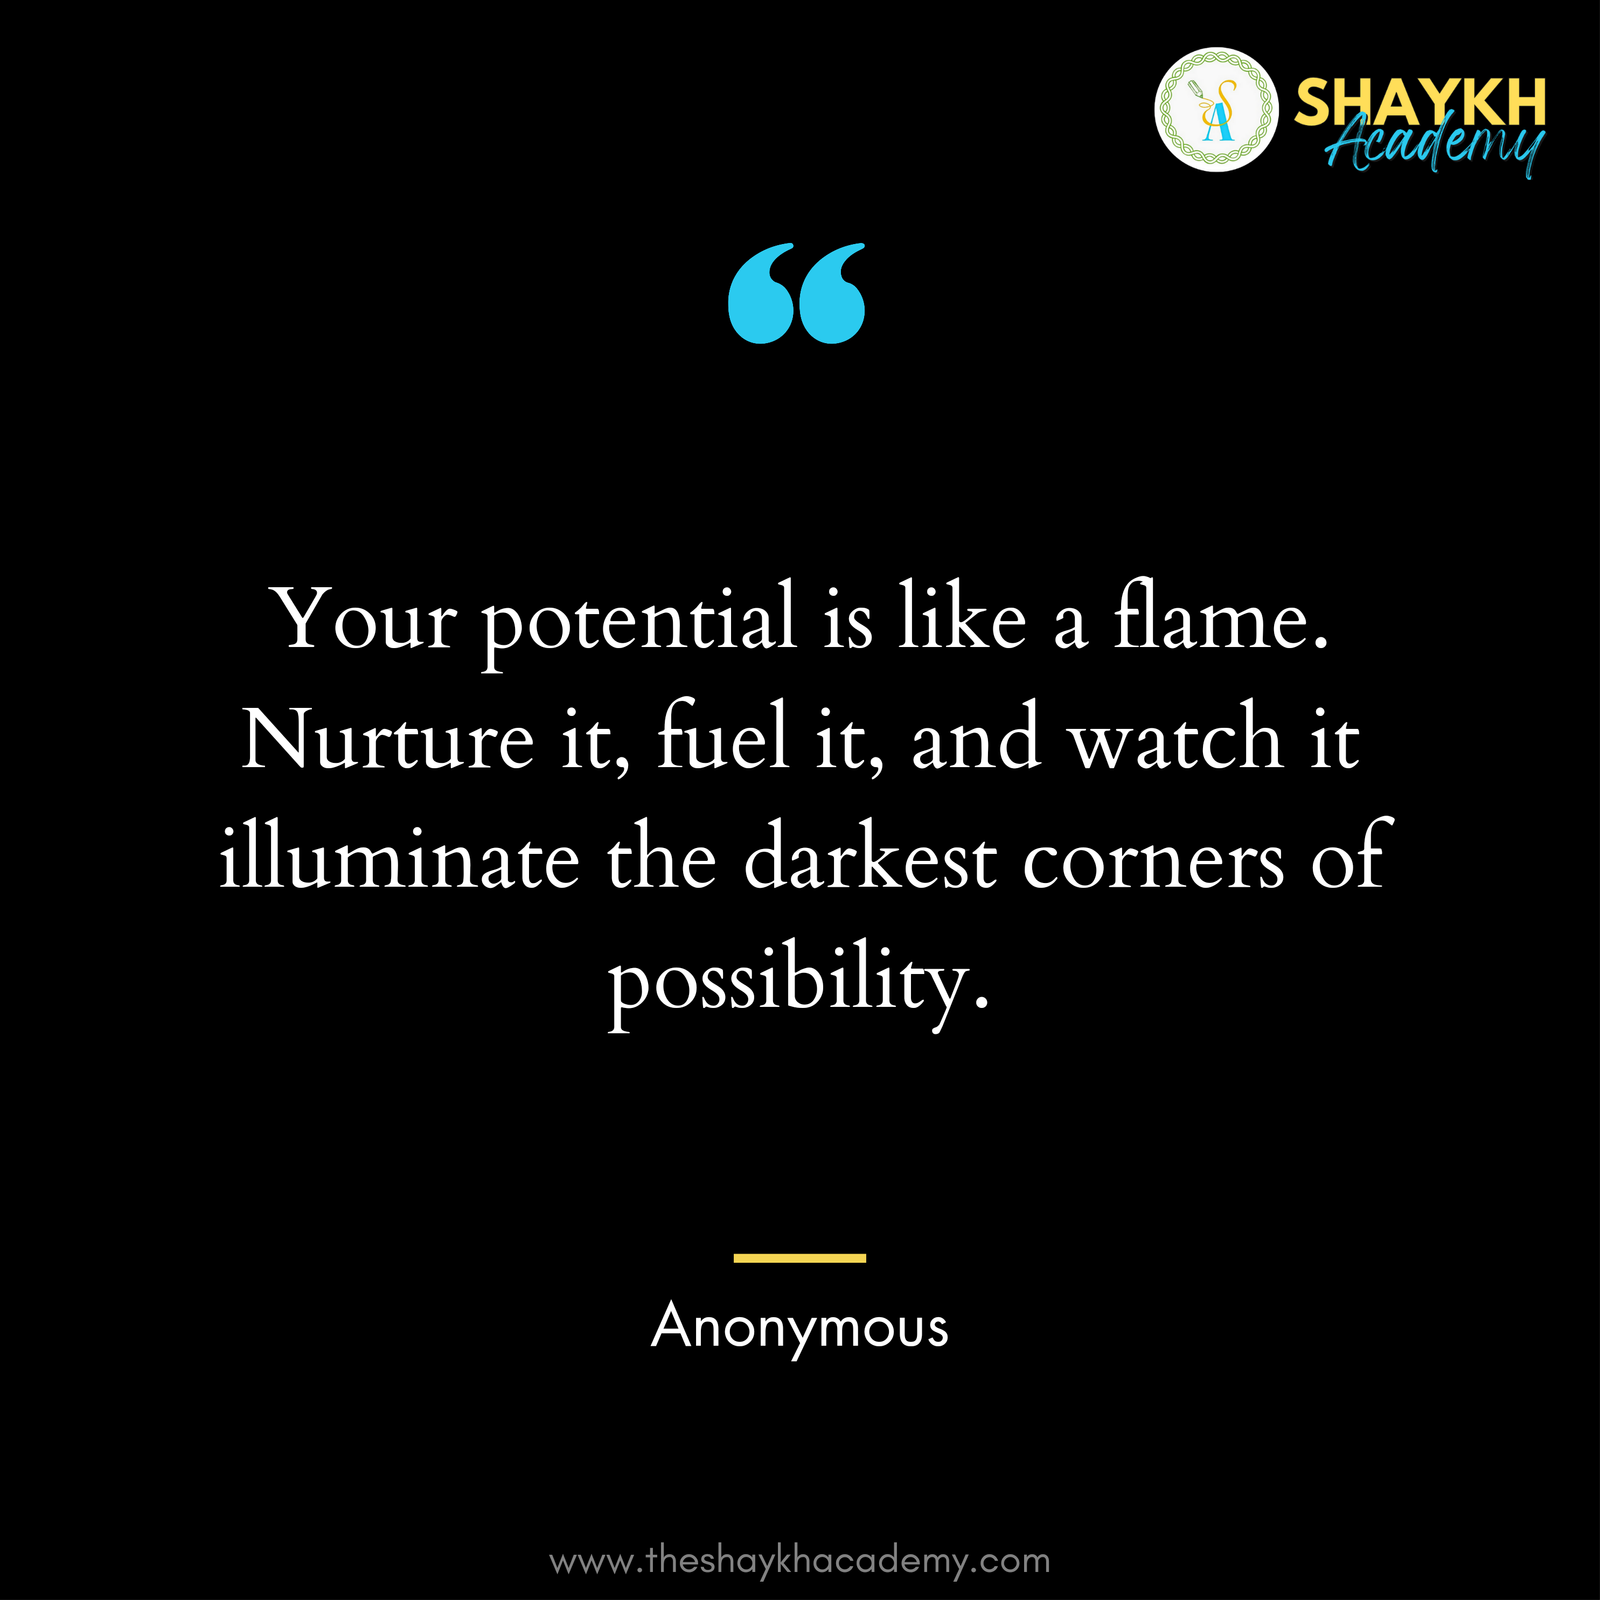 Your potential is like a flame – nurture it, fuel it, and watch it illuminate the darkest corners of possibility.